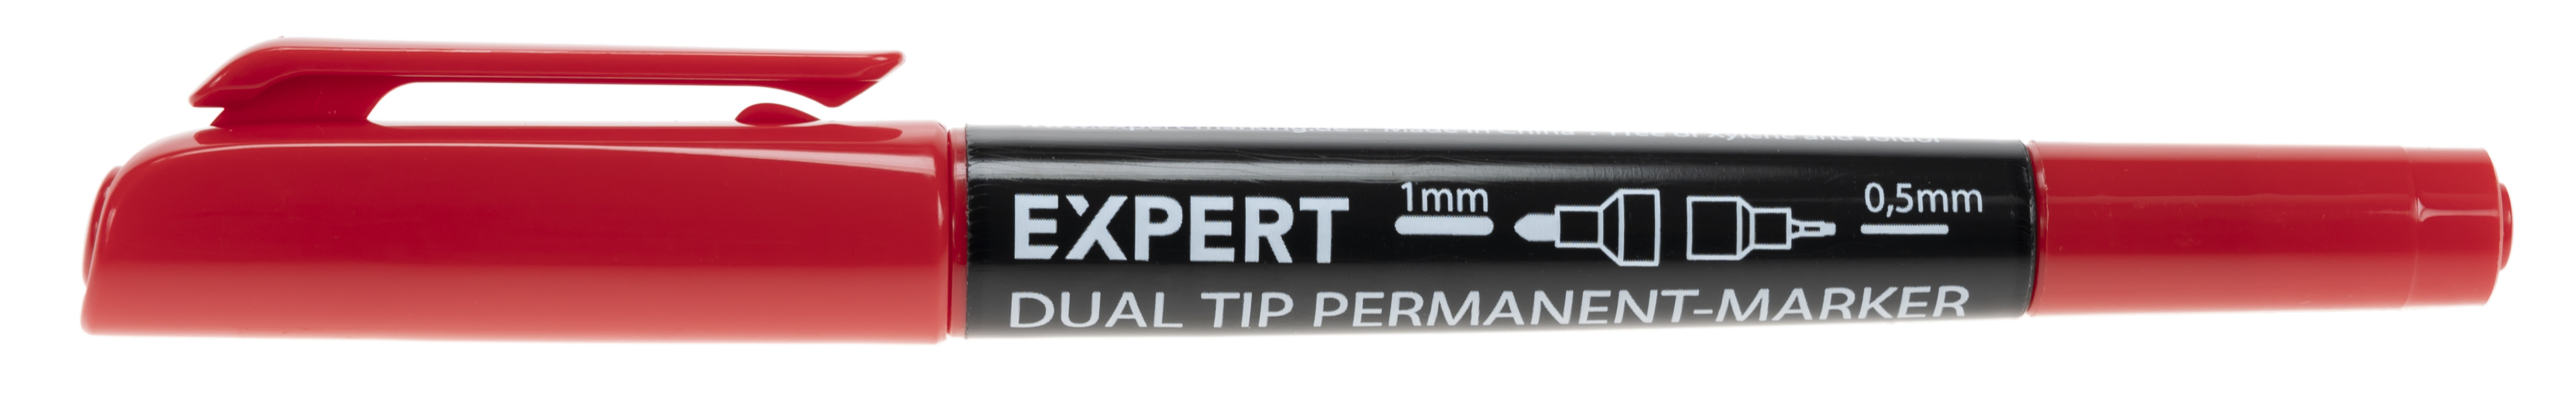 EXPERT DUAL TIP red